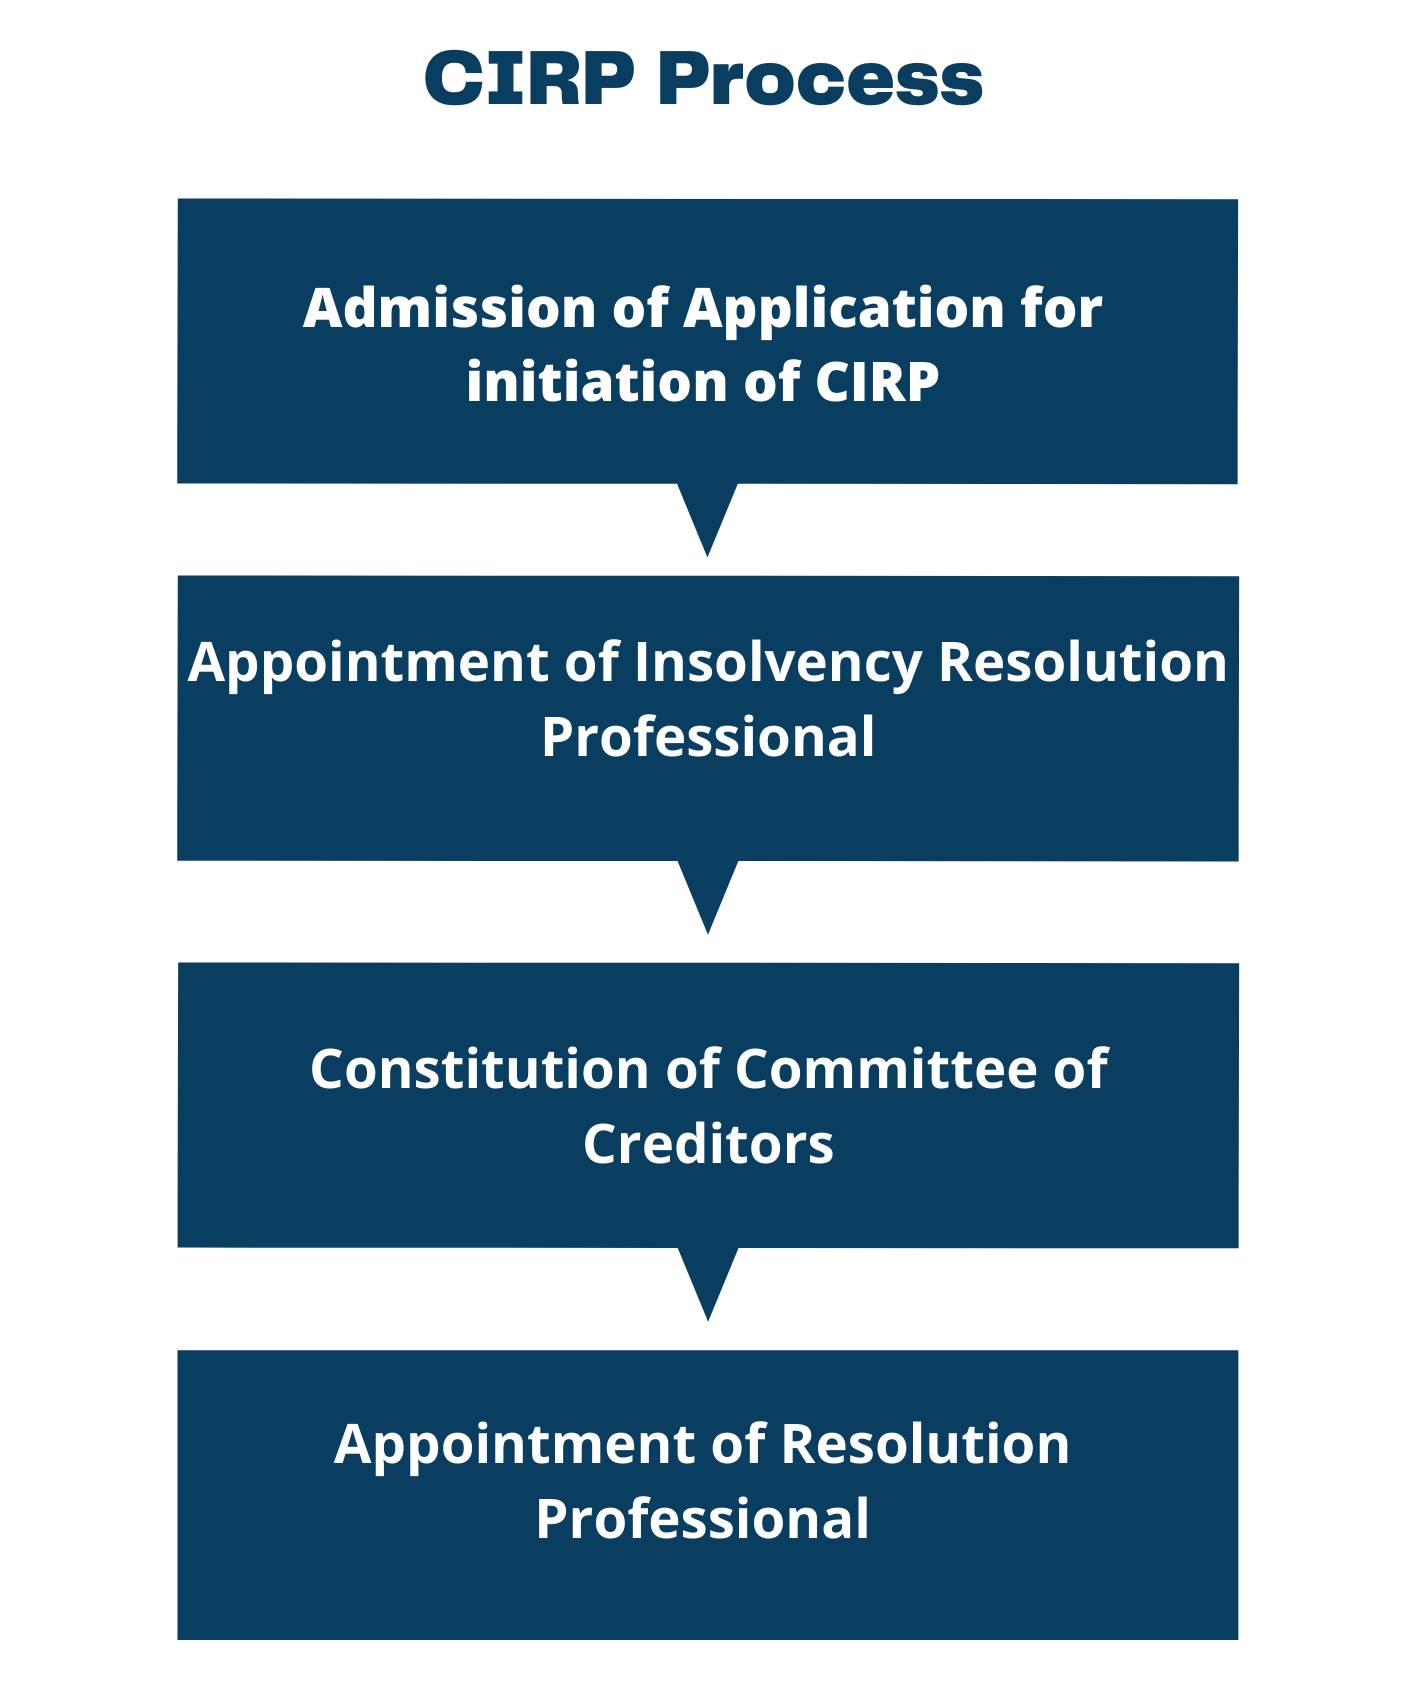 CIRP-Process in india.